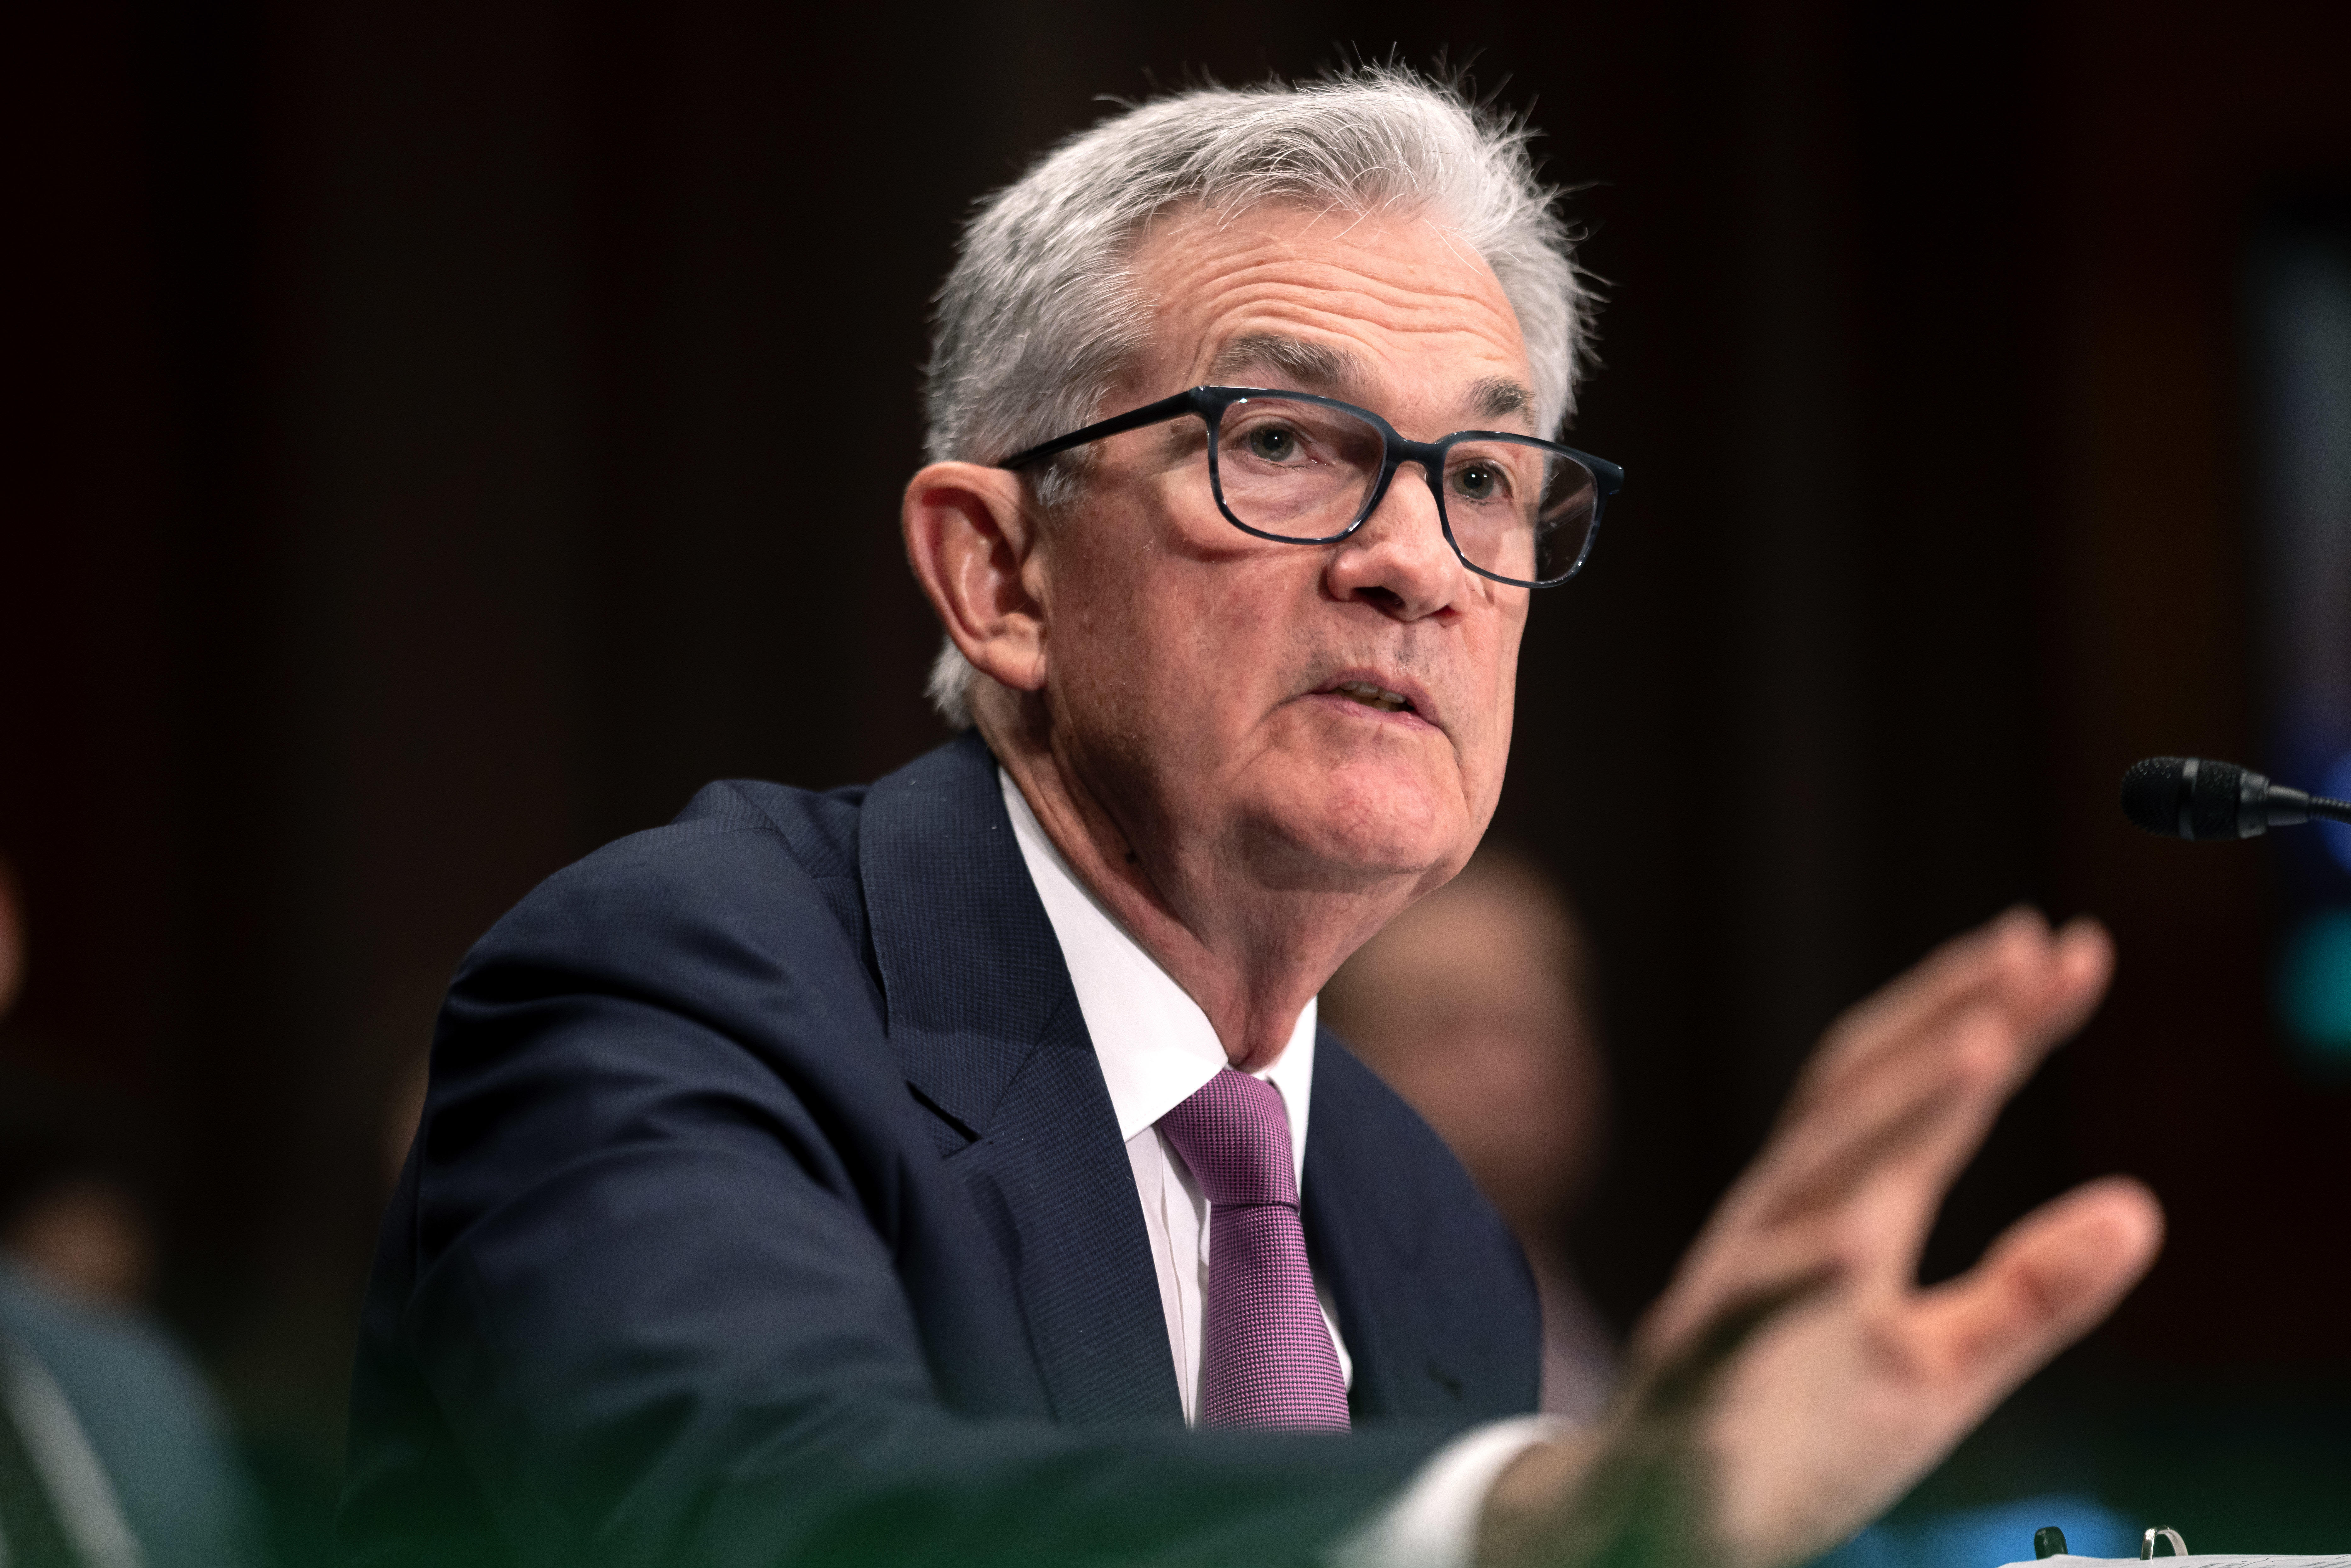 The Fed set to issue decision on interest rates. Here's what to expect.